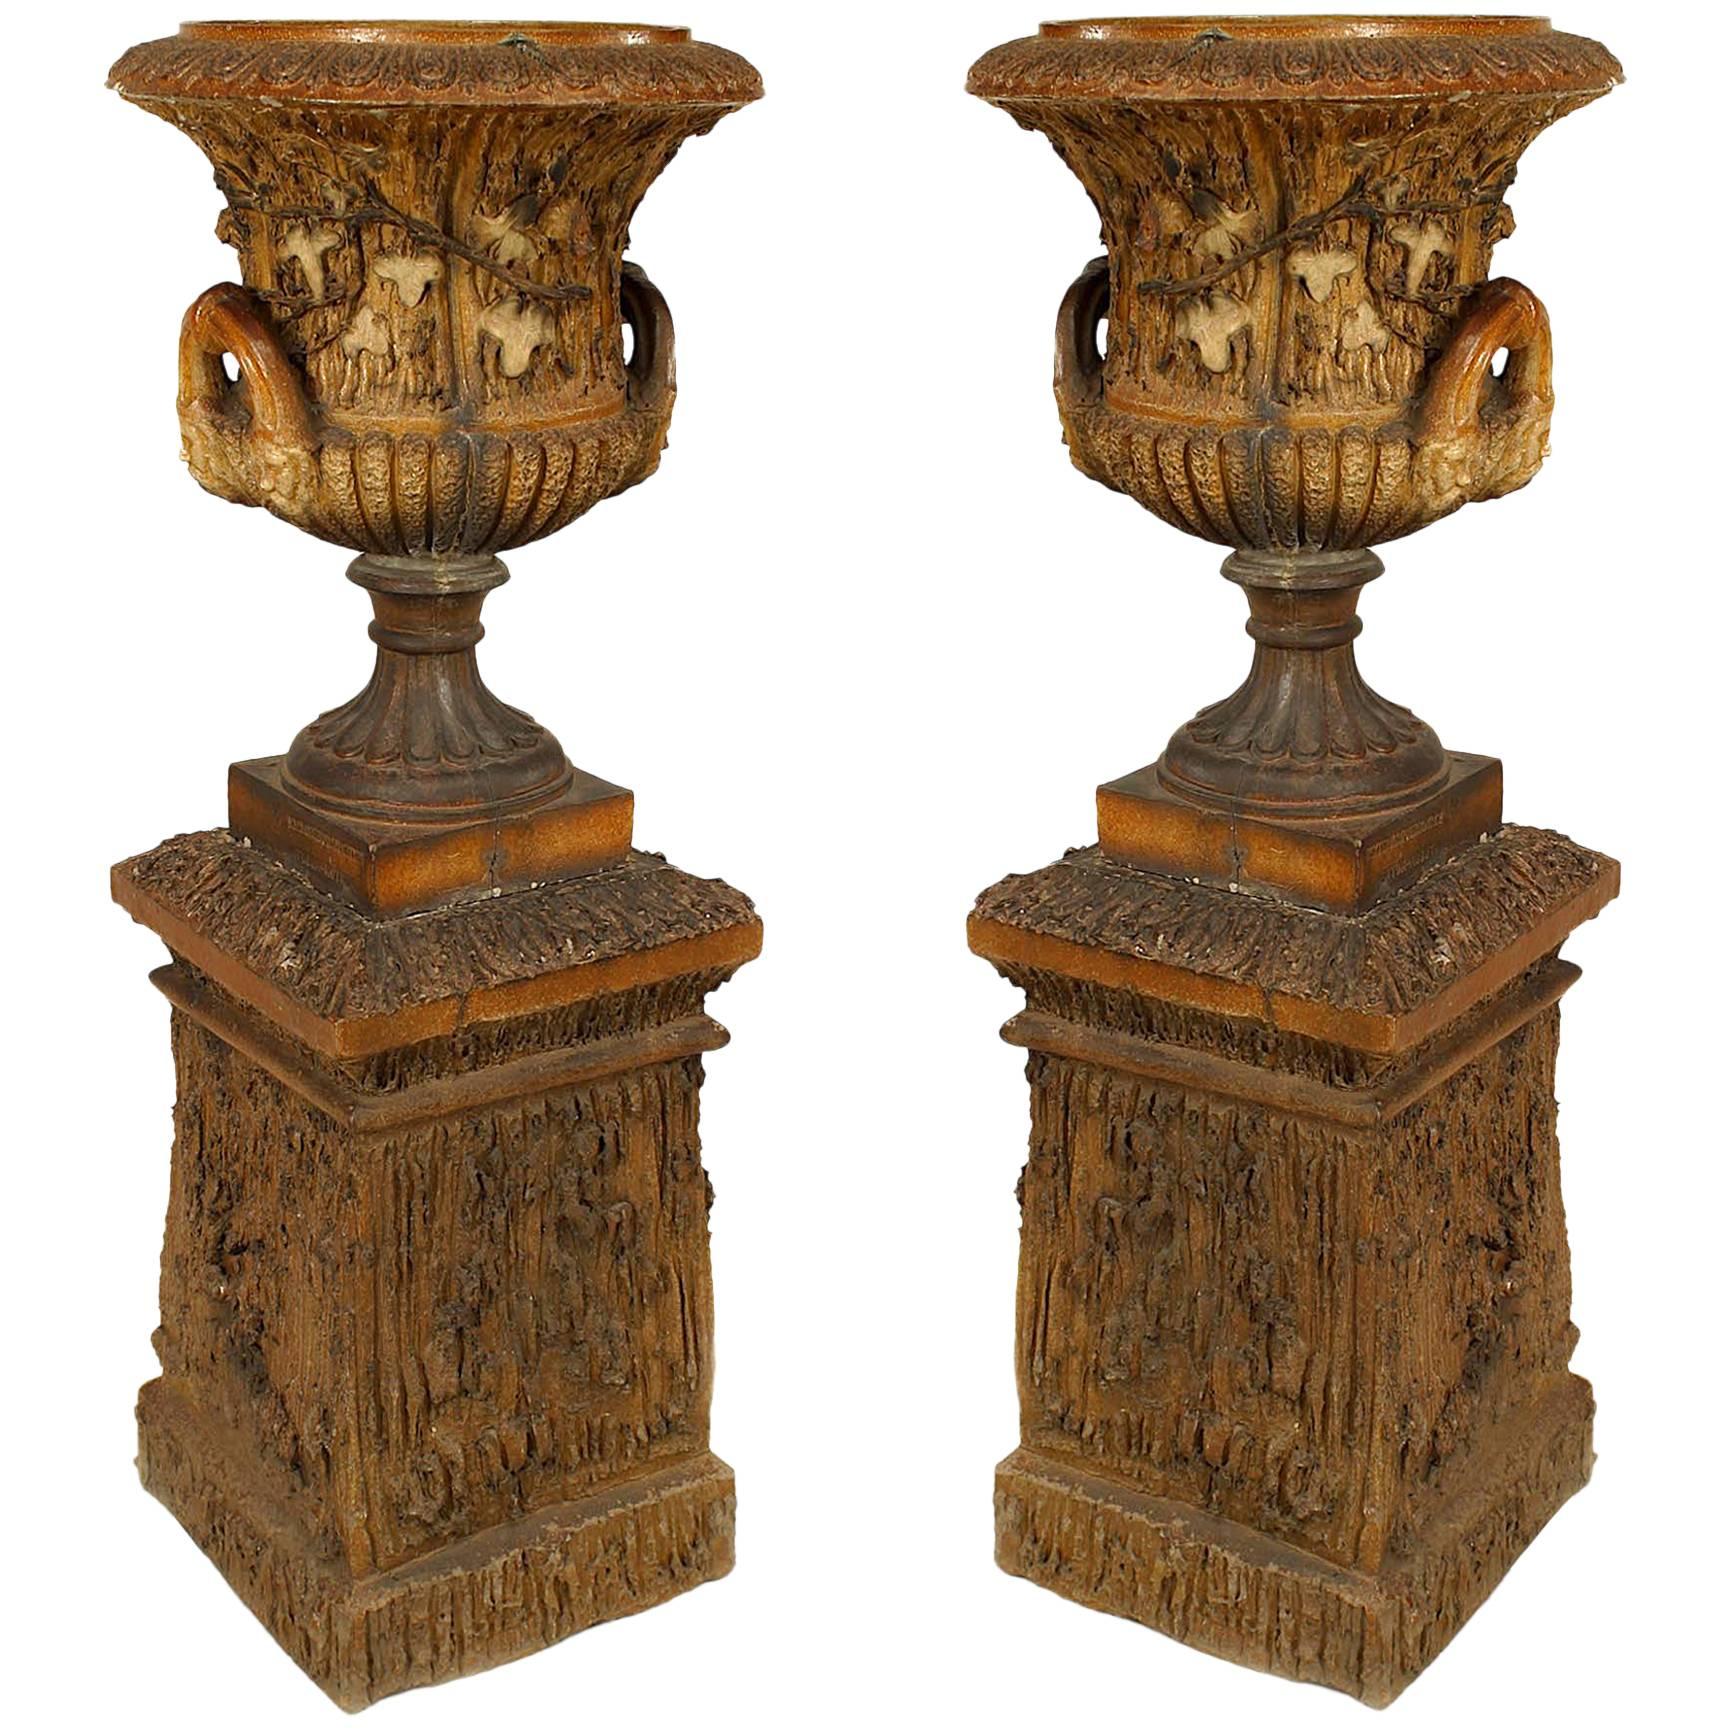 Pair of Outdoor English Victorian Urns